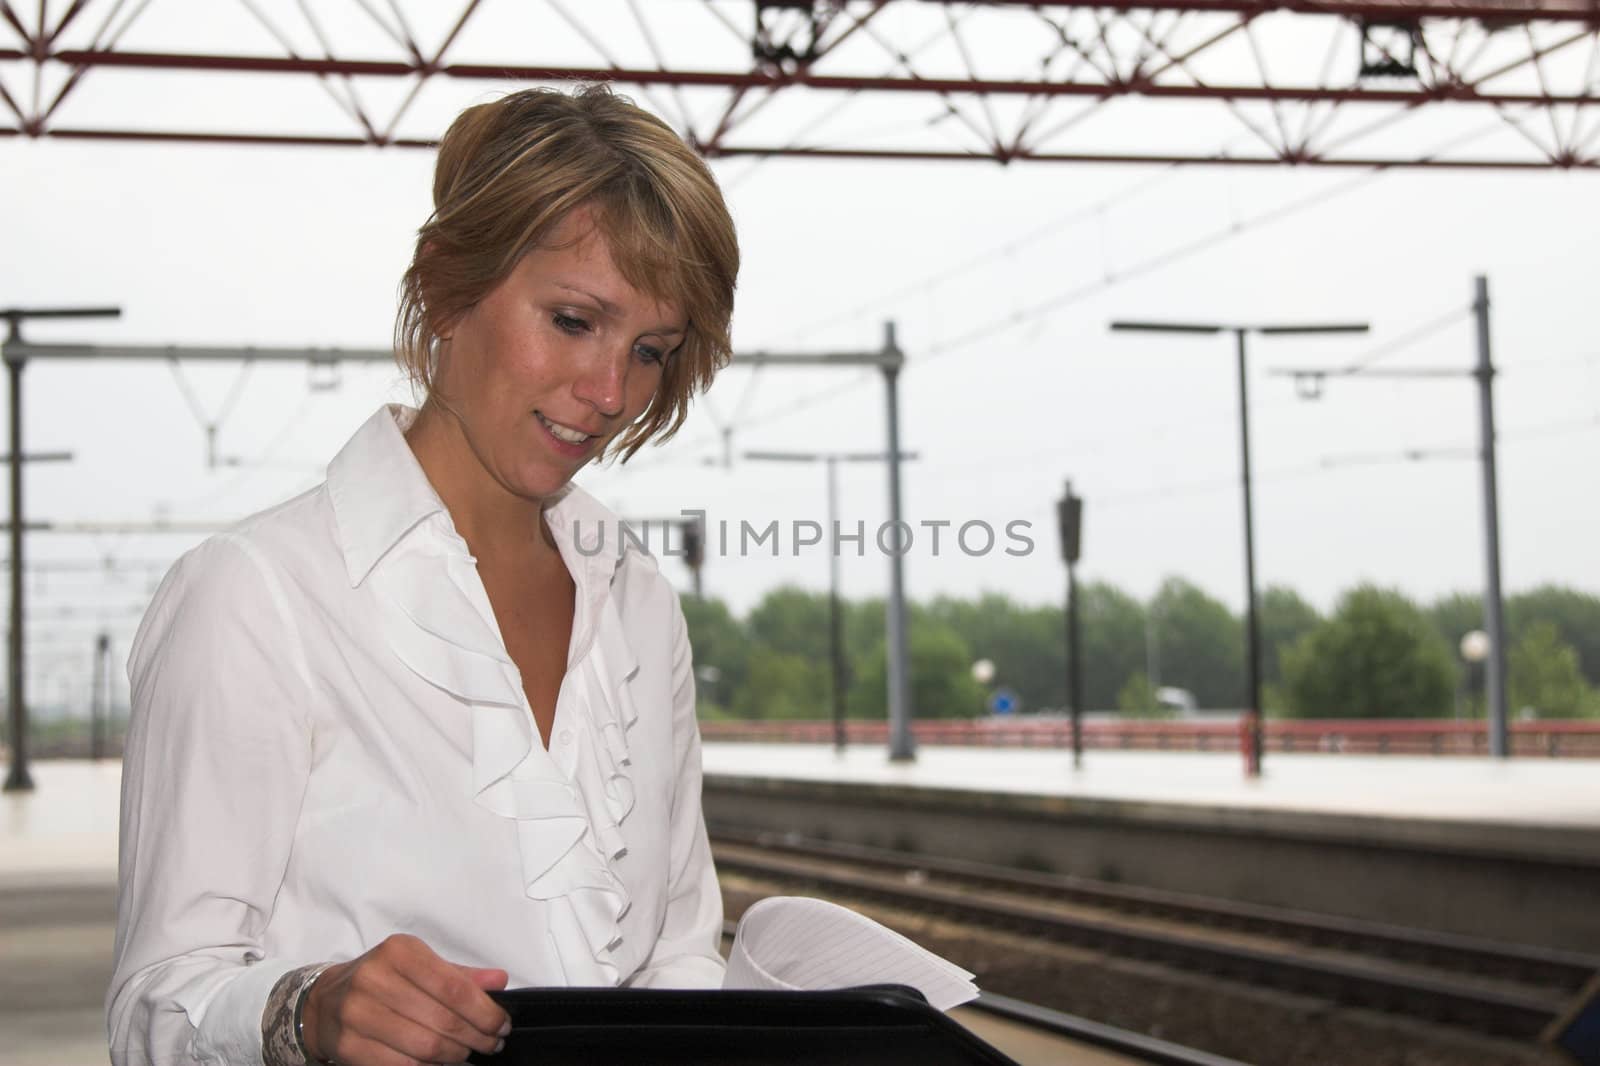 Working at the trainstation by Fotosmurf